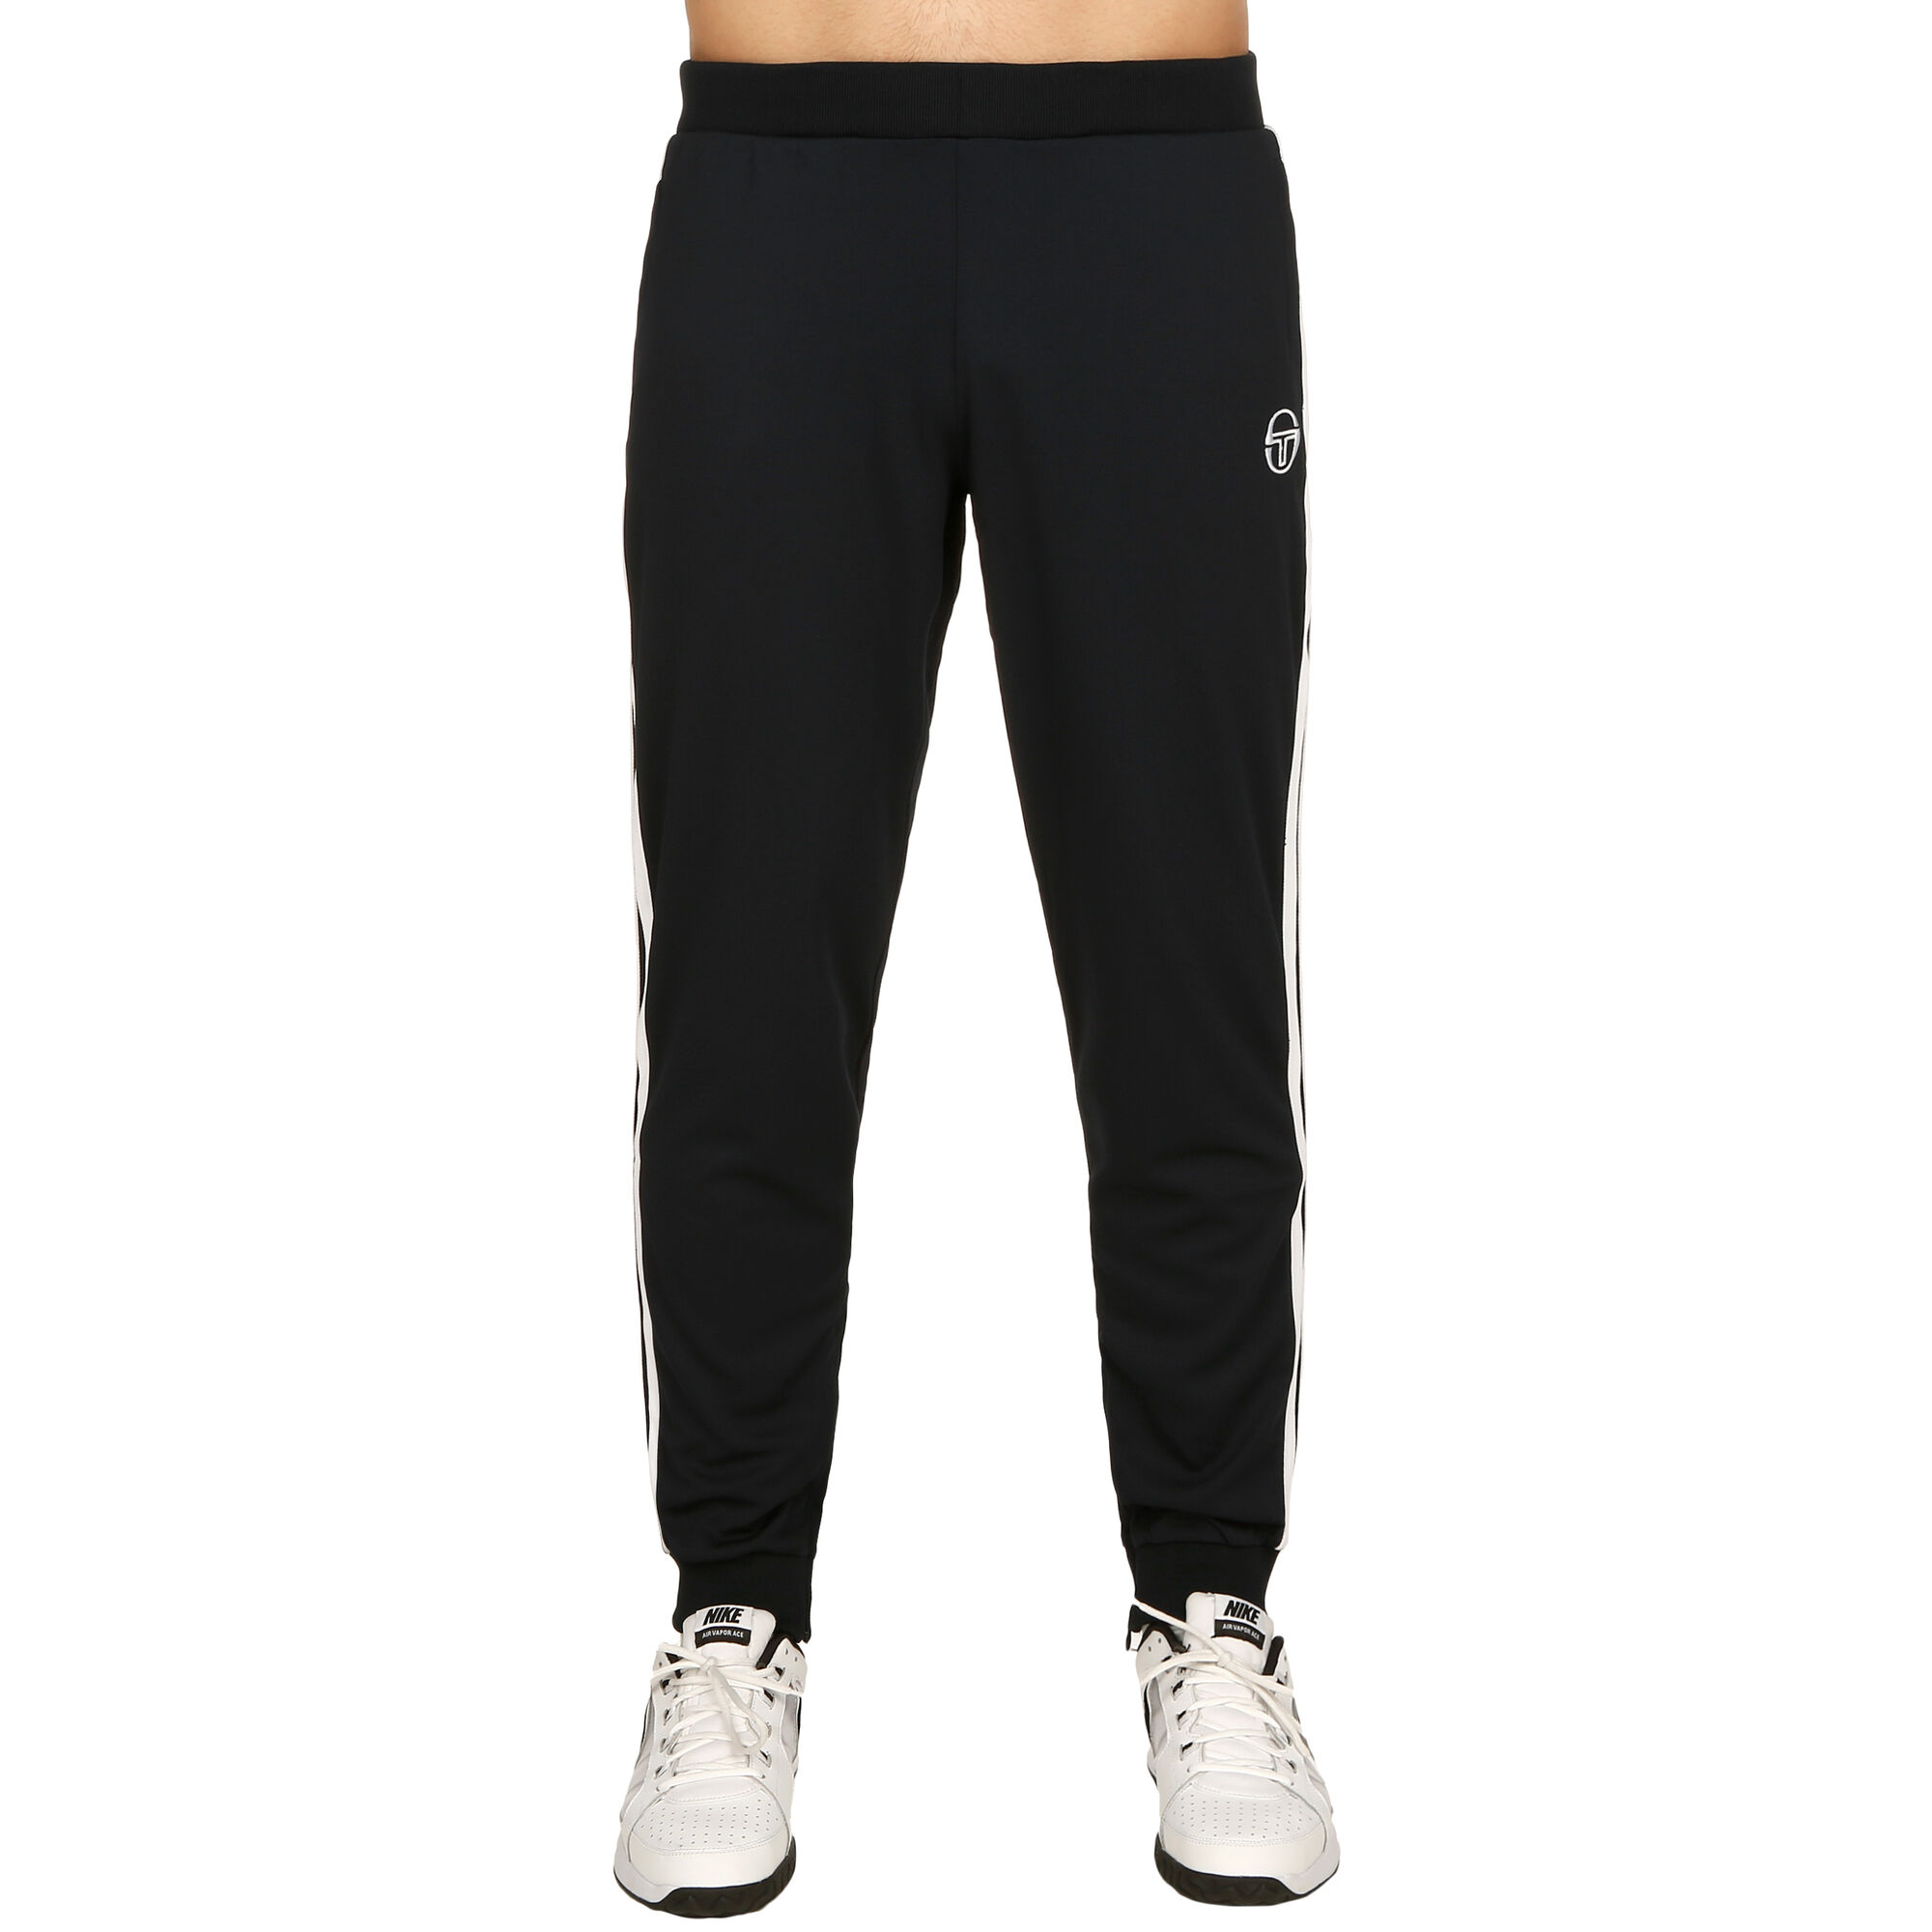 online | Tennis-Point buy Sergio Tacchini Young Line Pro Training Pants ...